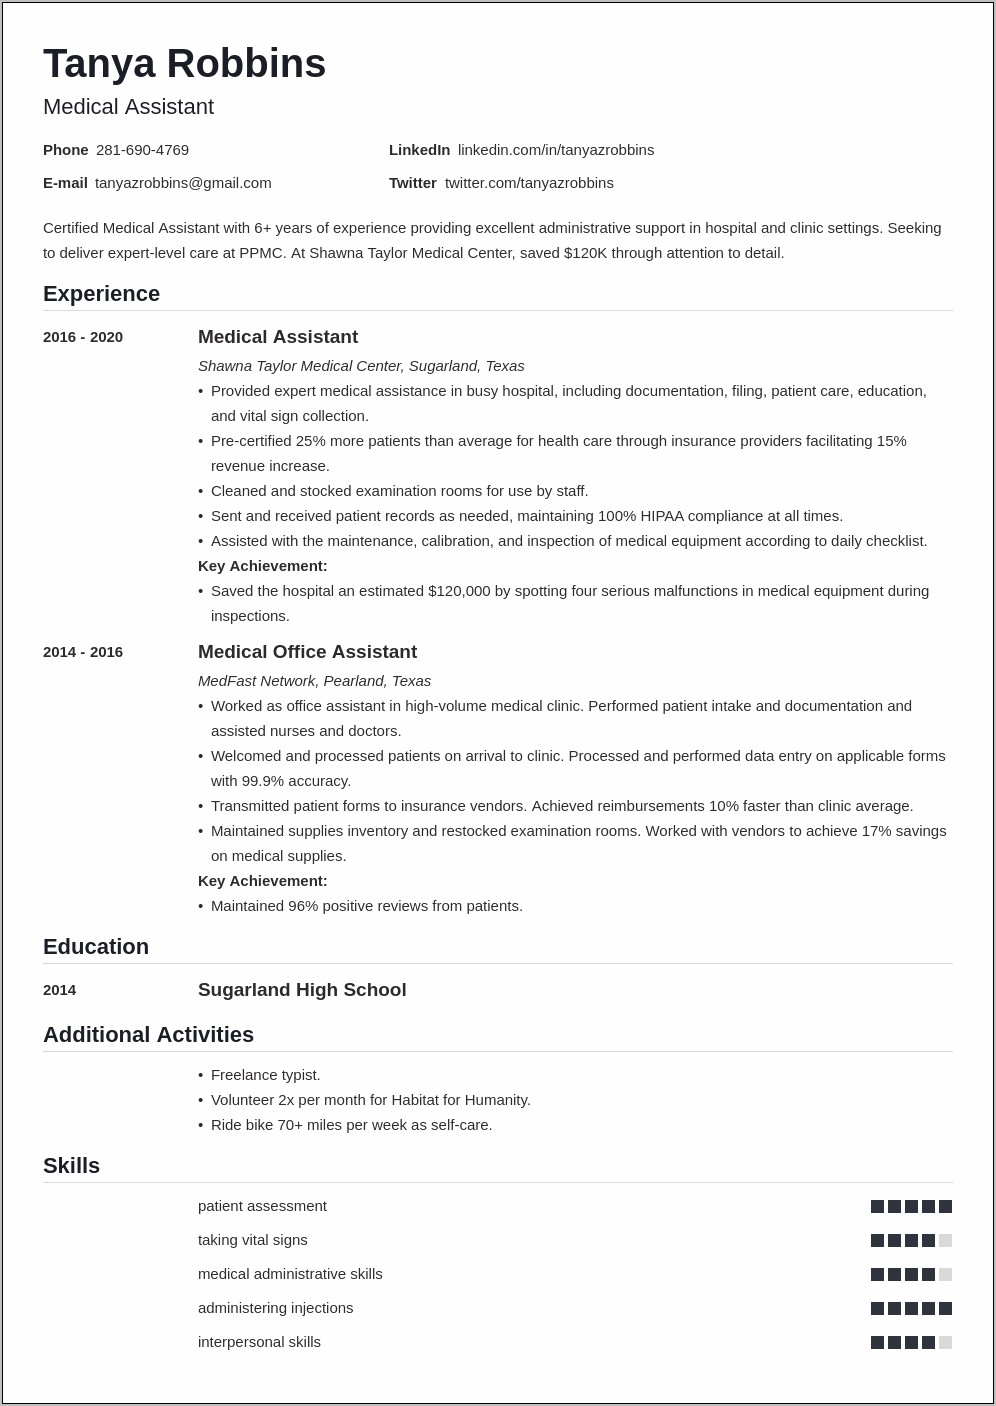 Profile Sample In A Medical Assistant Resume